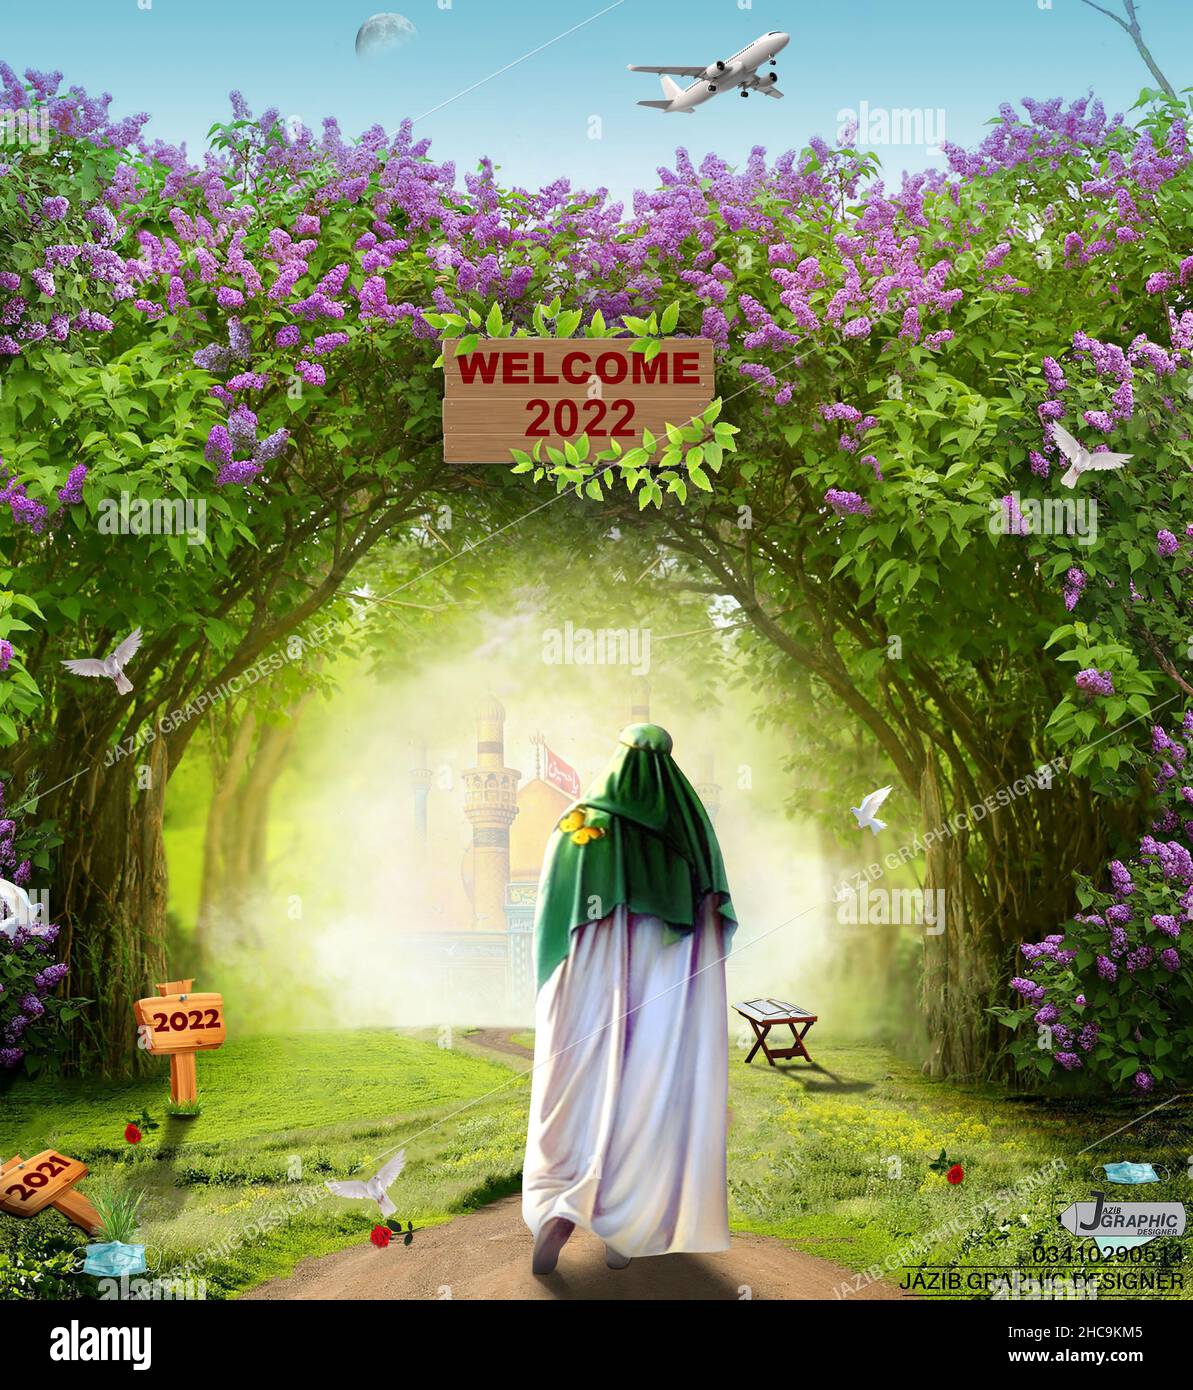 The Manipulation New Year 2022 islamic Concepts Stock Photo